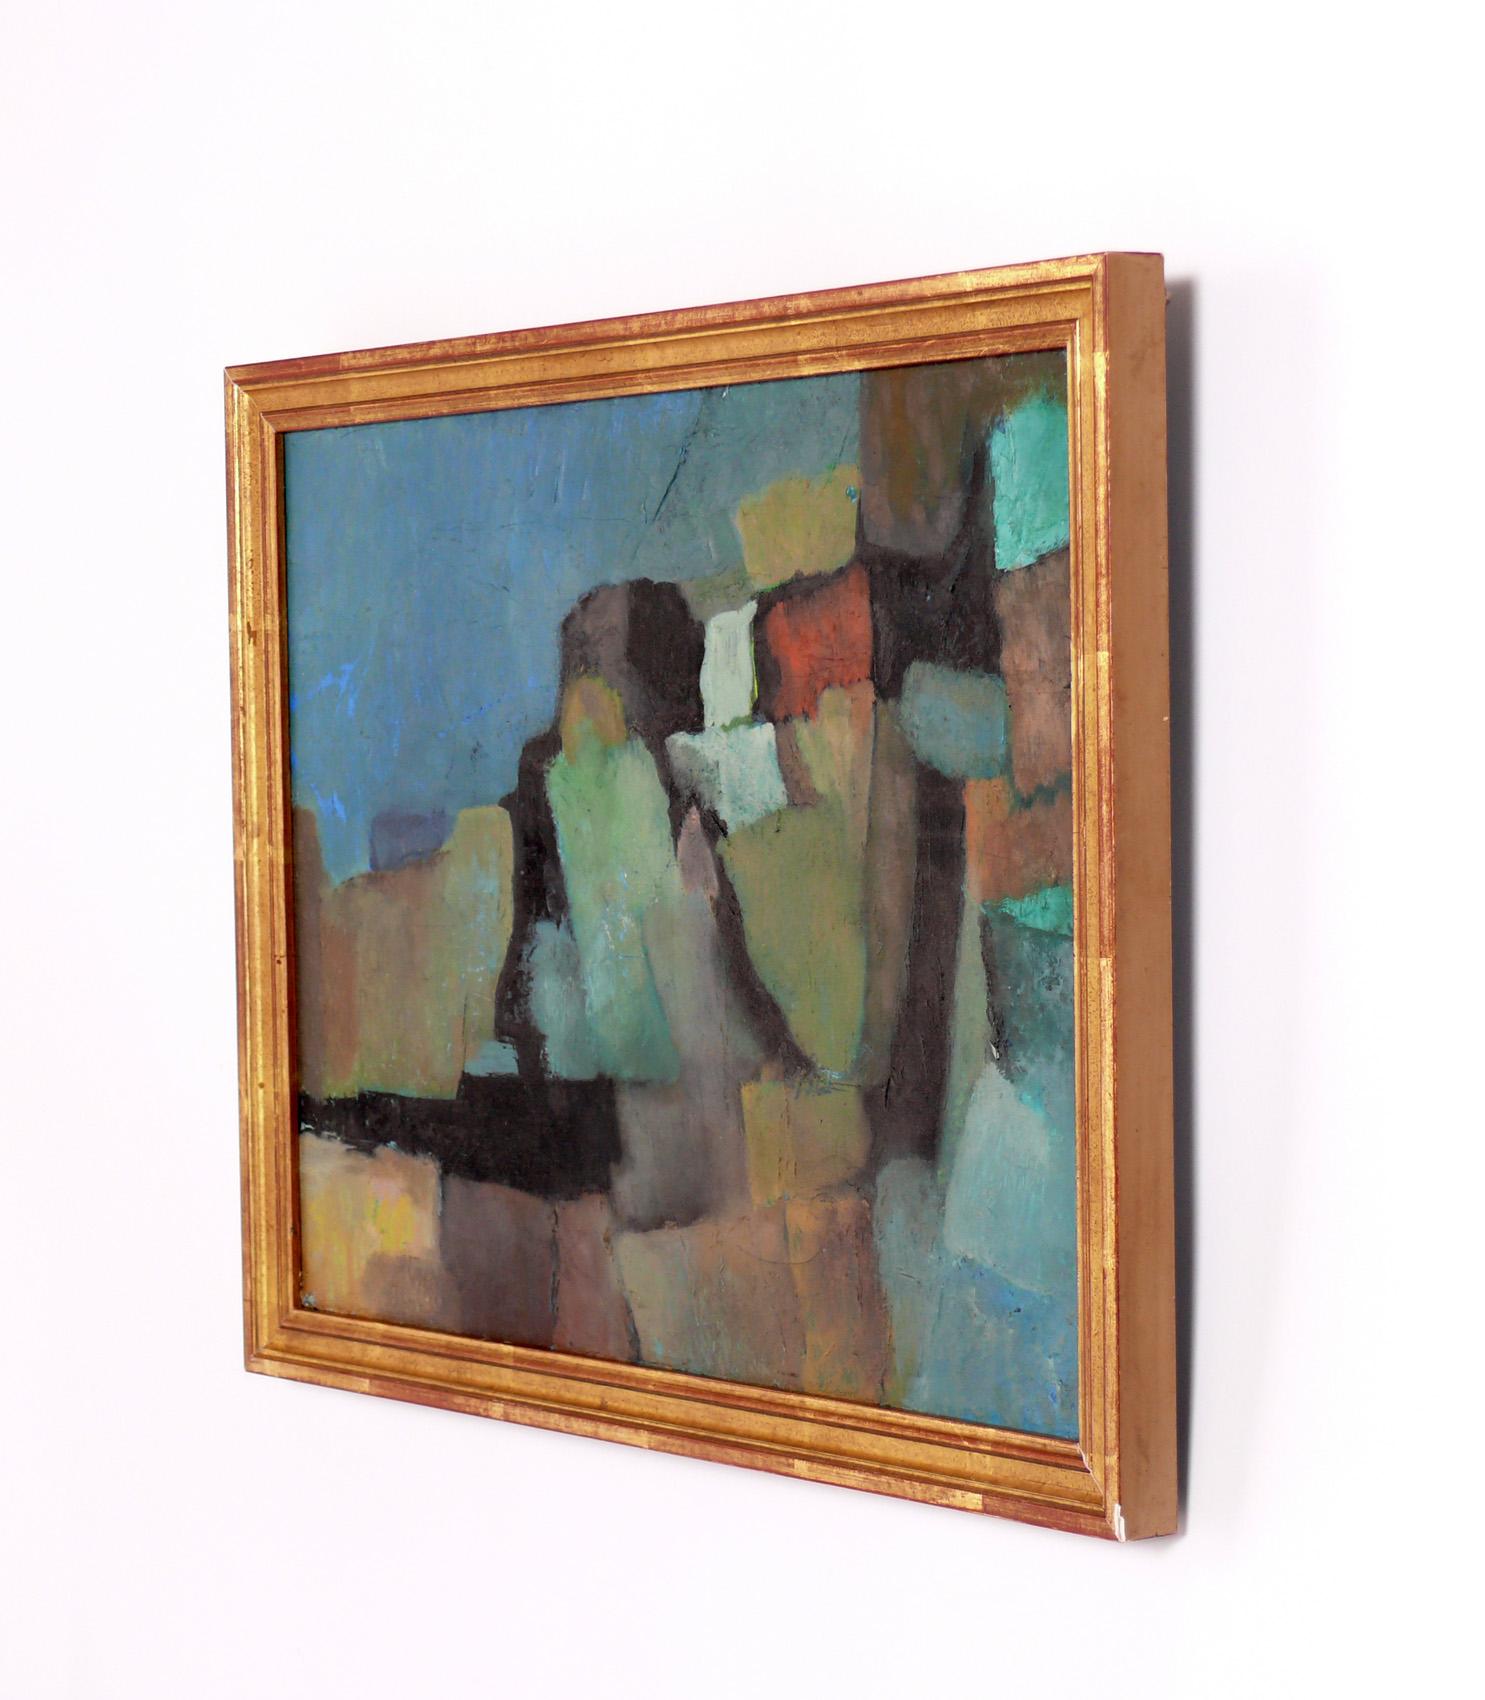 Original Abstract Mid Century Painting, artist unknown, believed to be American, circa 1960s. It has been recently professionally framed in a vintage gilt wood frame. 